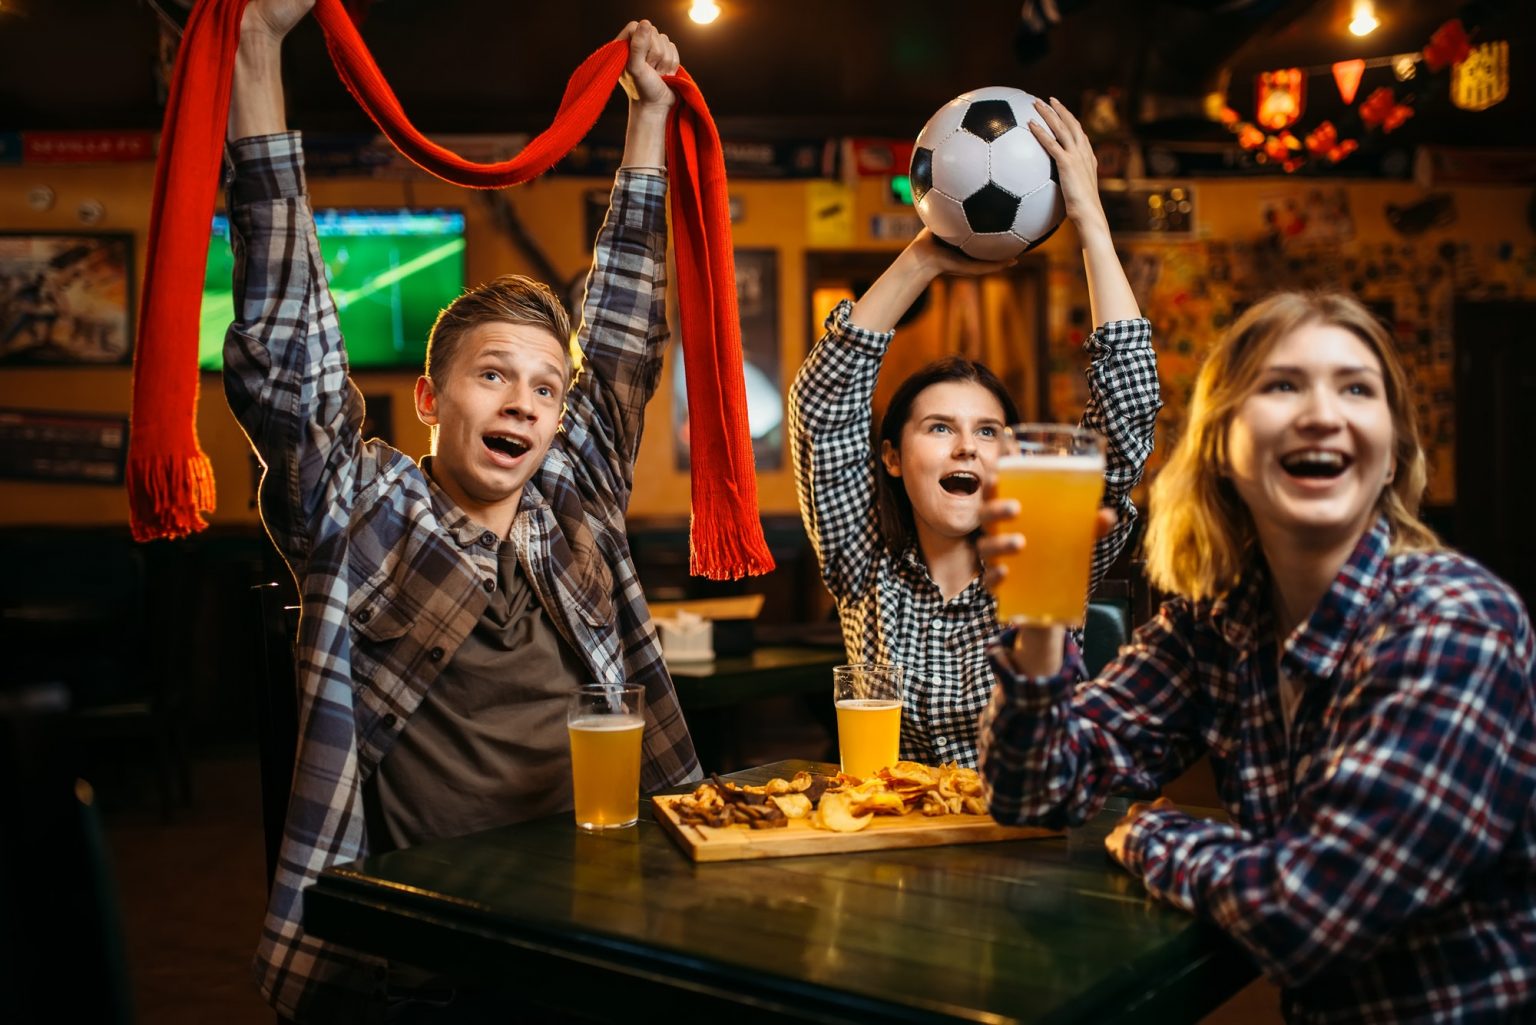 Football fans with scarf and ball in sports bar